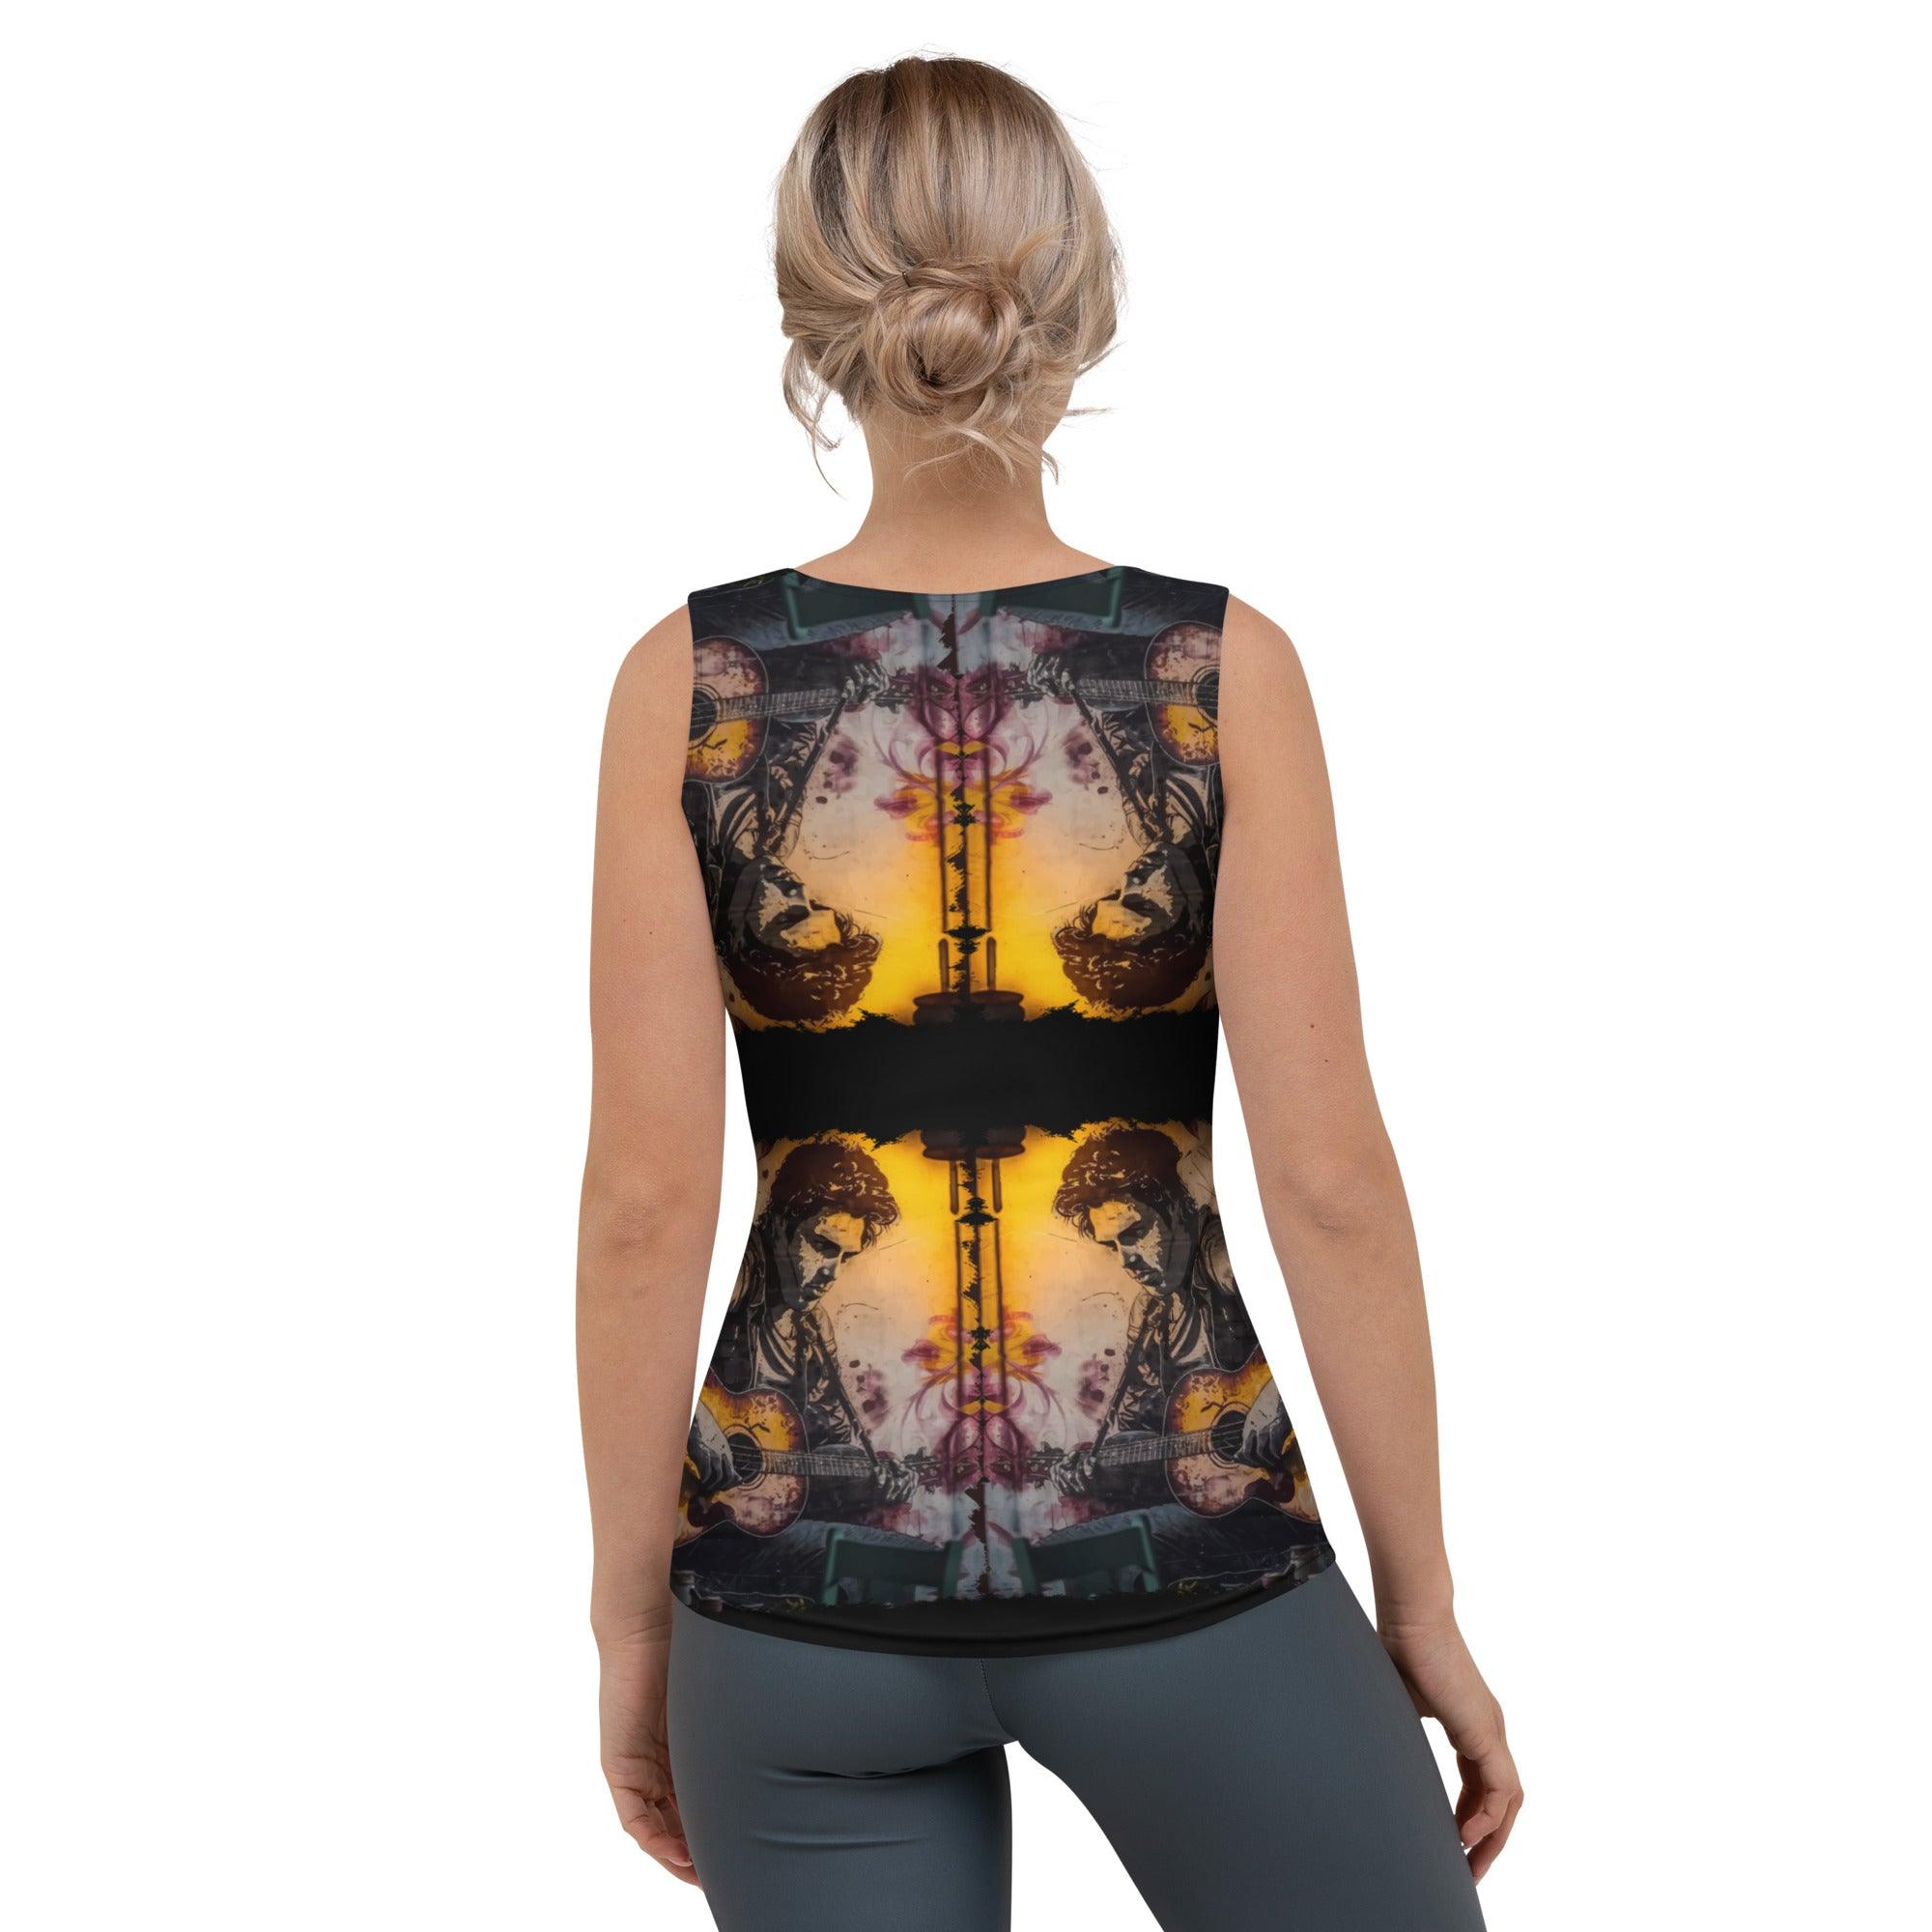 Making Music Come Alive Sublimation Cut & Sew Tank Top - Beyond T-shirts